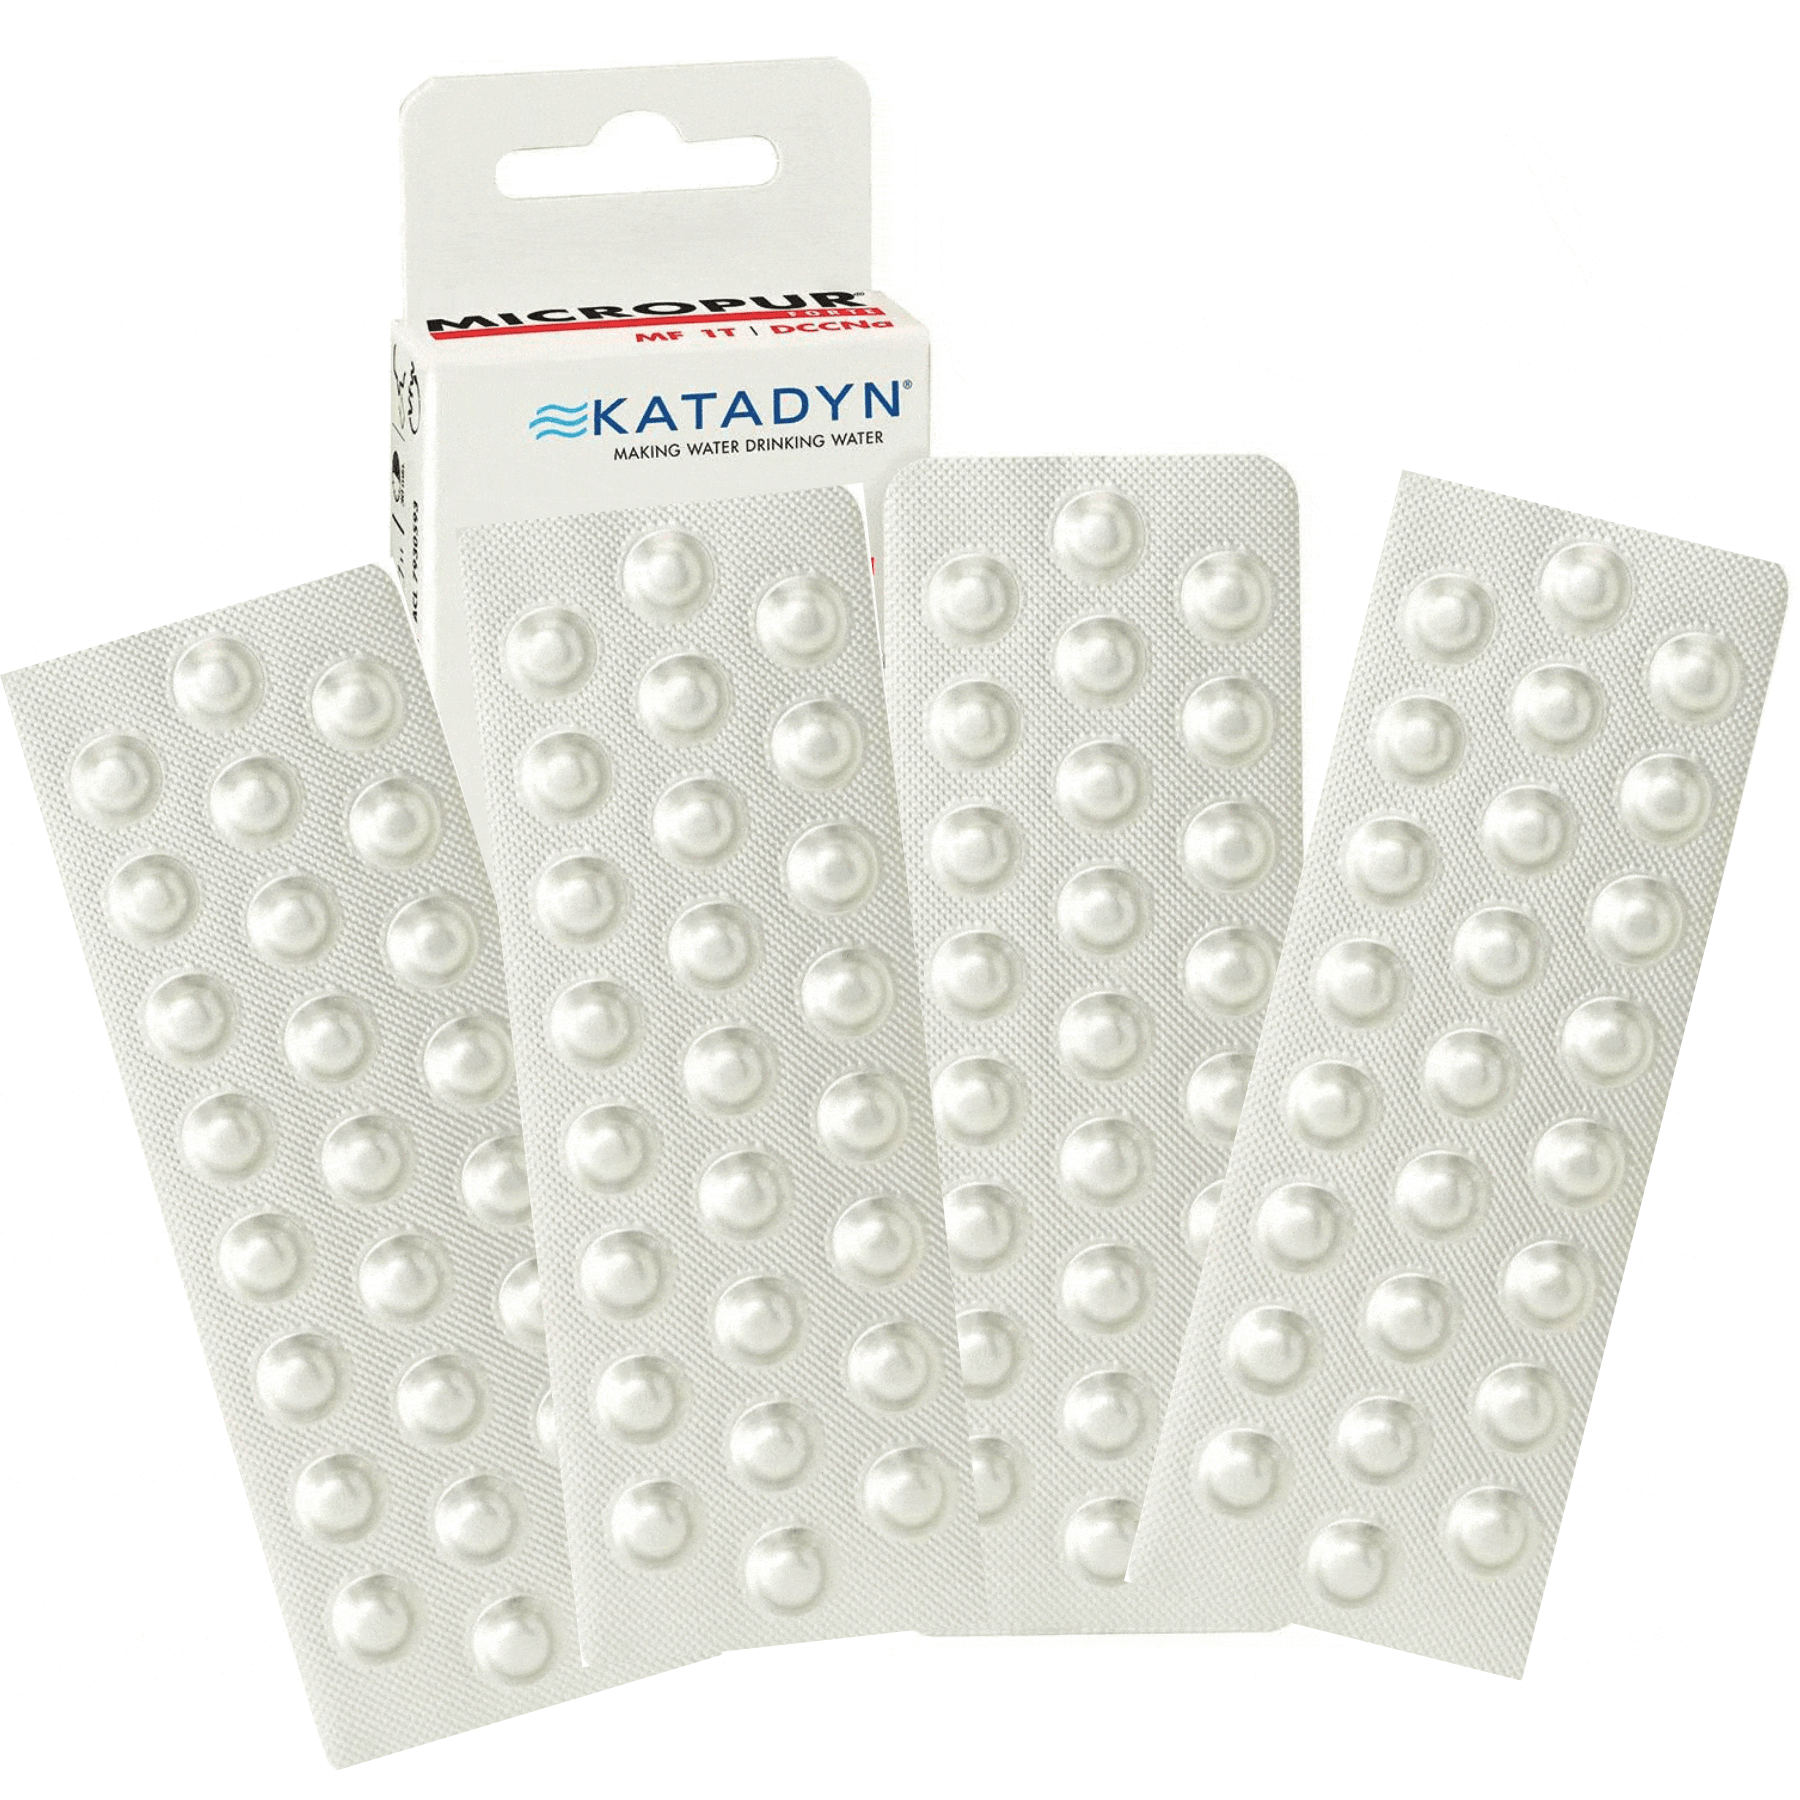 katadyn Water Treatment Tablets Single Pack - 100 Tabs MicroPur Forte Water Purifier Treatment Tablets KAT10002